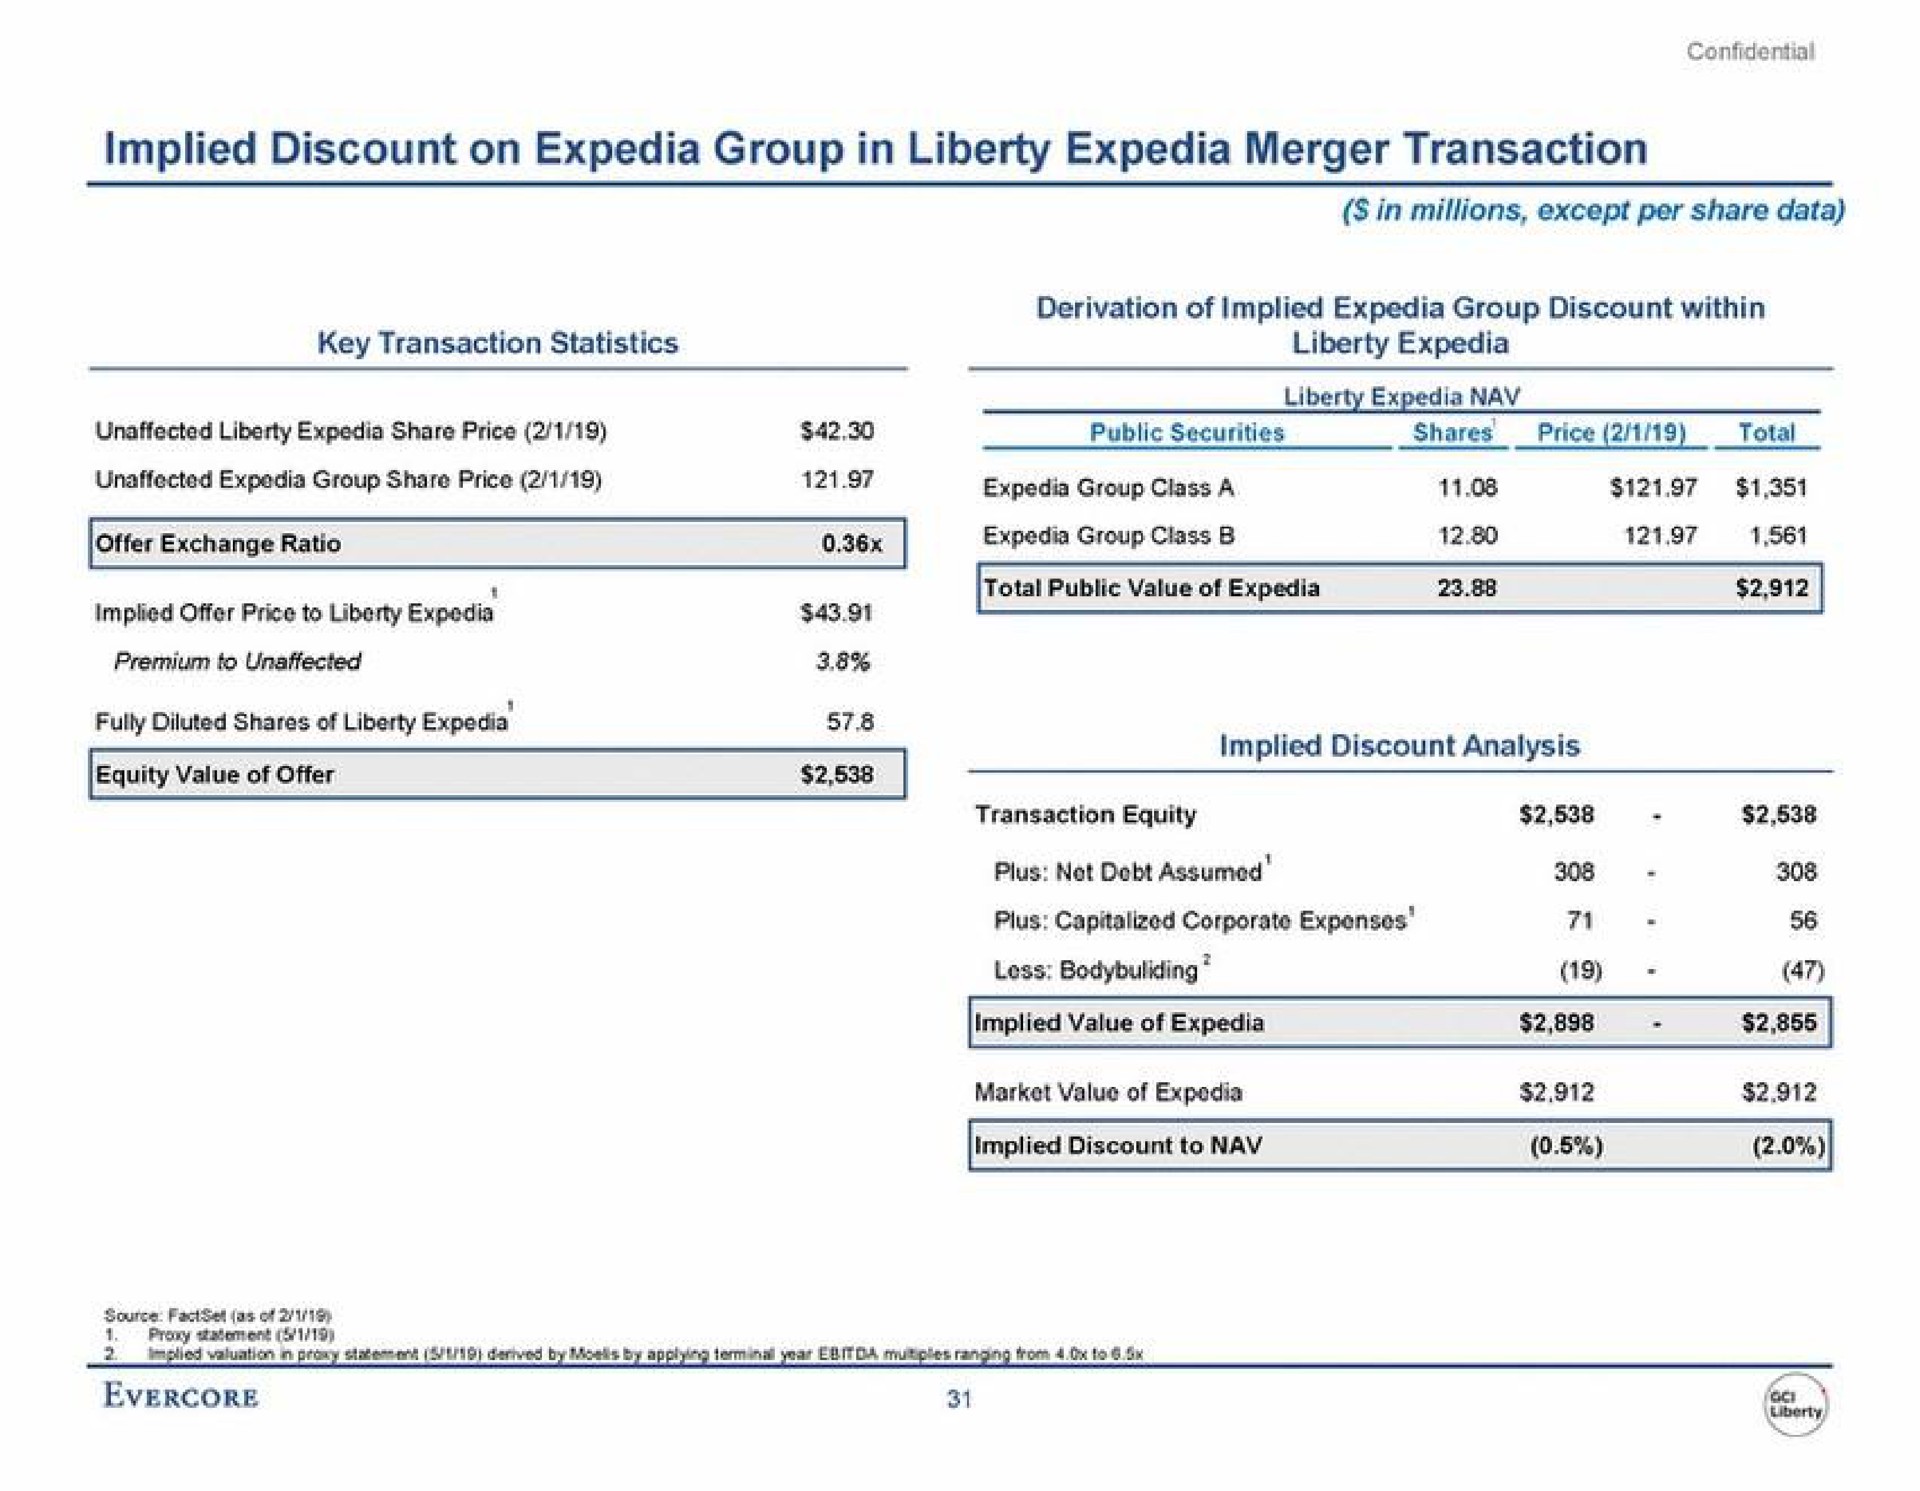 implied discount on group in liberty merger transaction fully diluted shares of liberty total public value of implied value of market value of | Evercore